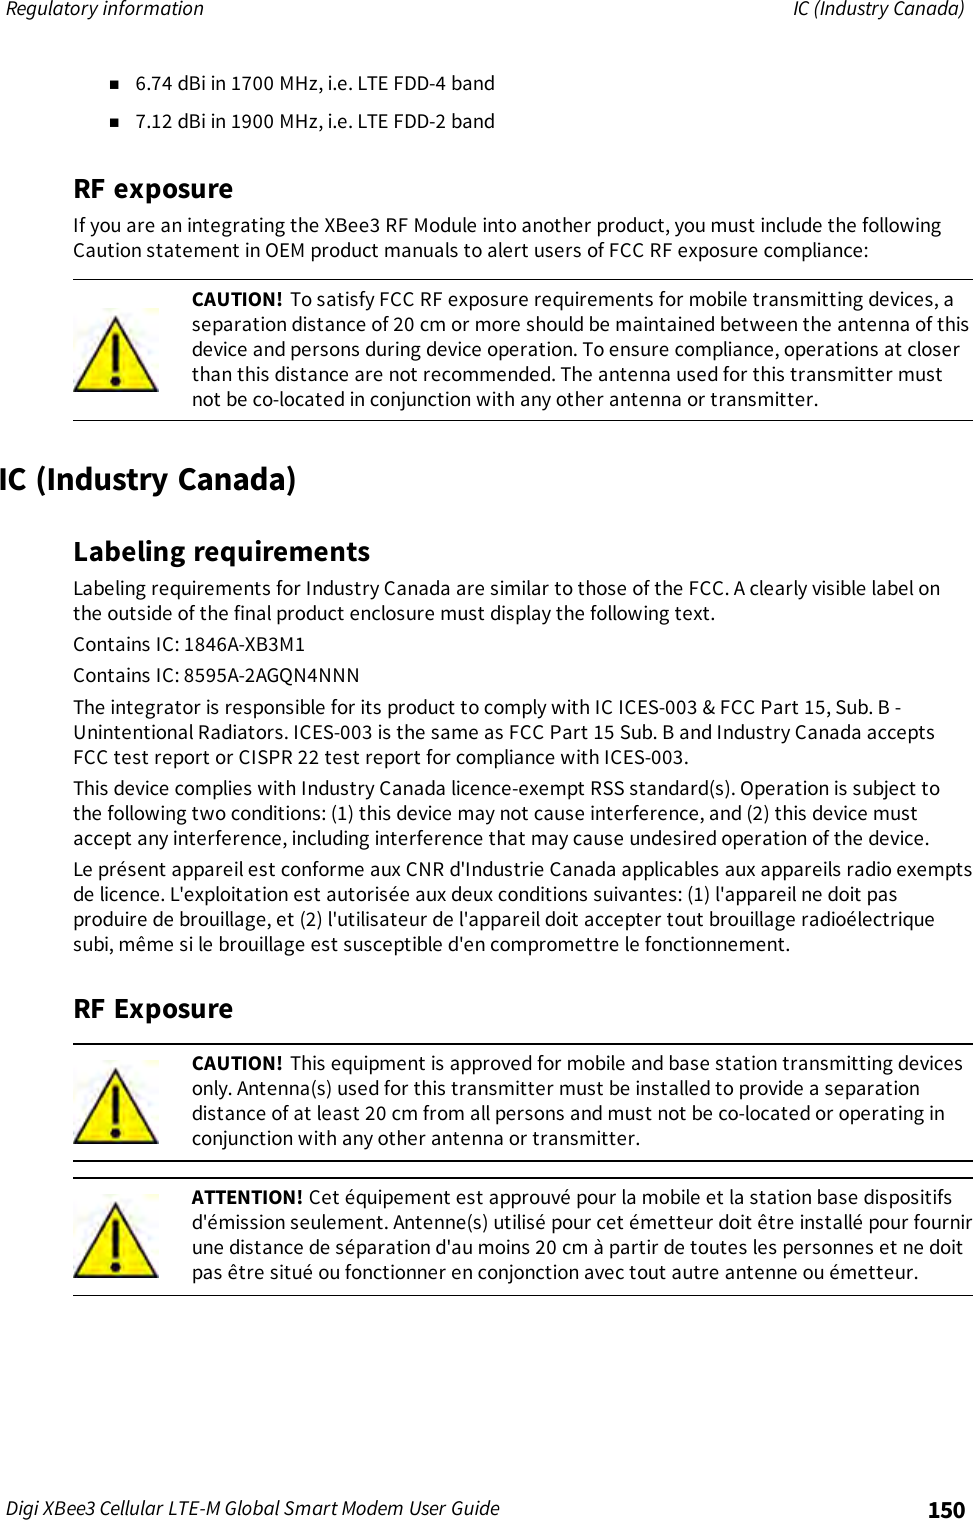 Page 150 of Digi XB3M1 XBee3 Cellular LTE-M User Manual 